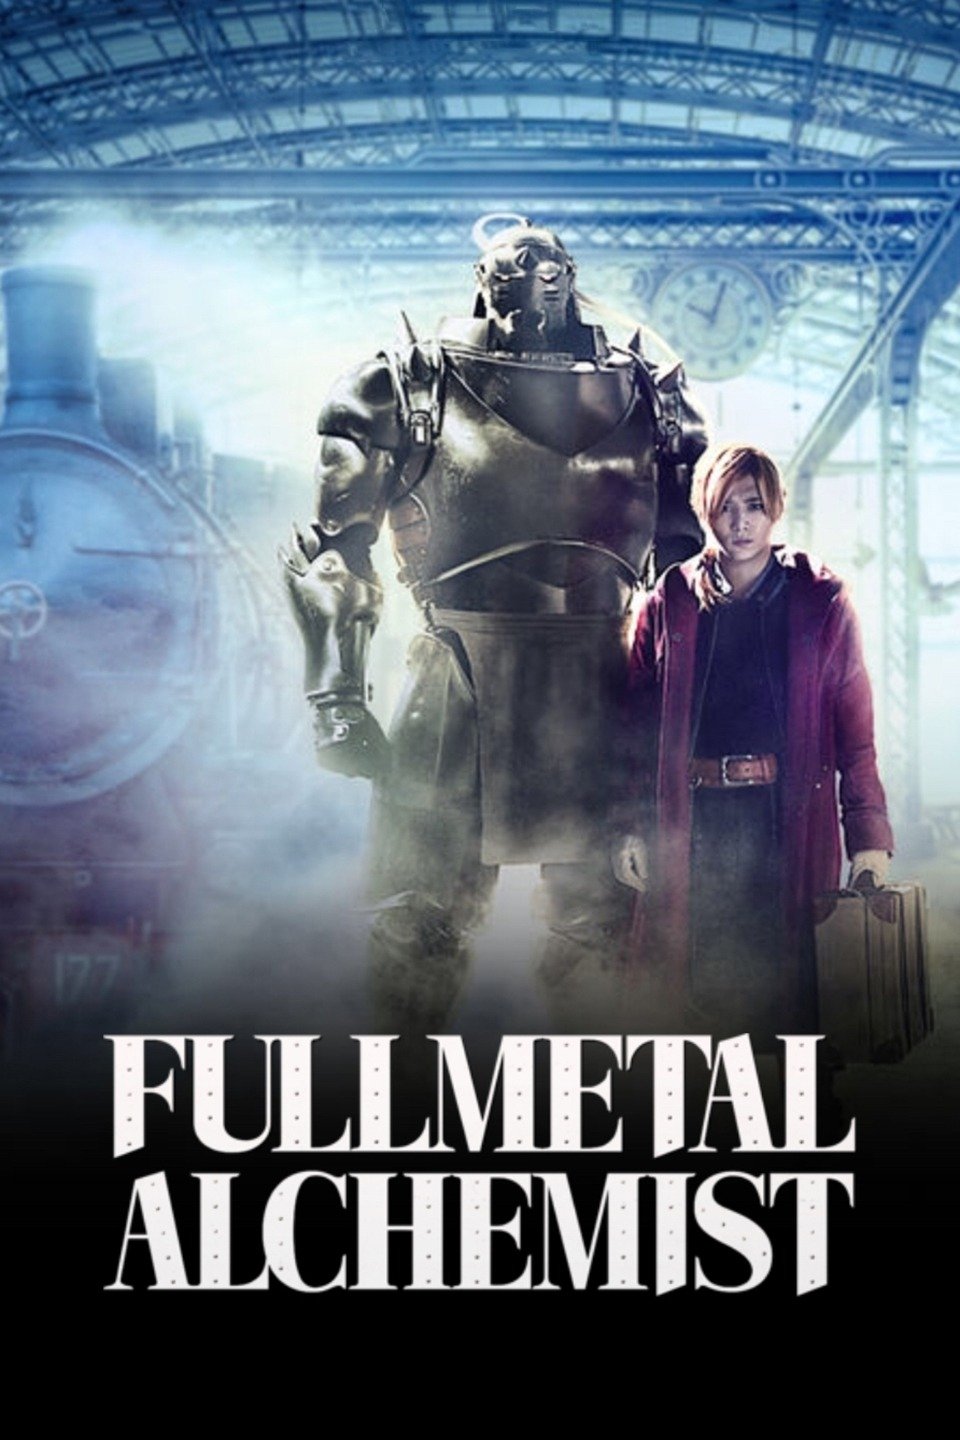 Fullmetal Alchemist (3-in-1 Edition), Vol. 1 | Book by Hiromu Arakawa |  Official Publisher Page | Simon & Schuster UK